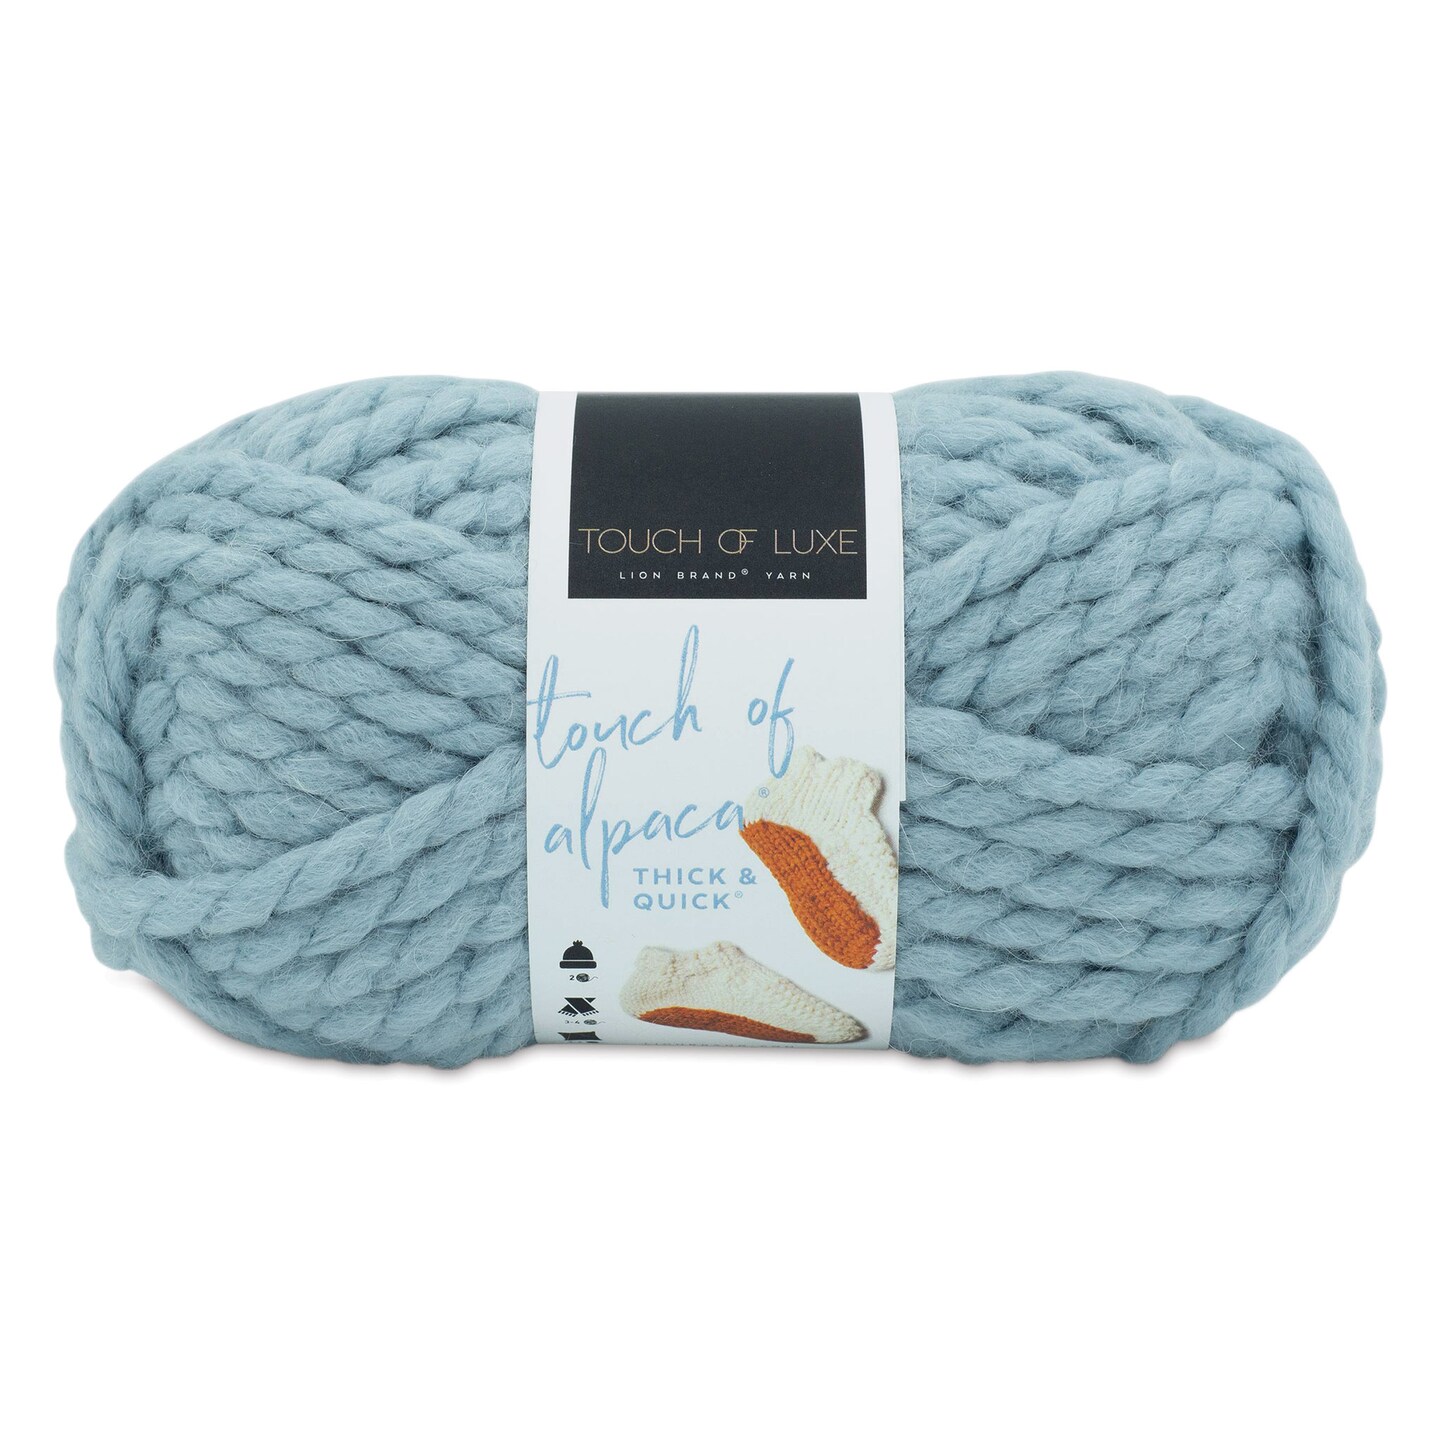 Lion Brand Touch of Alpaca Thick & Quick Yarn - Moonlight, 44 yds